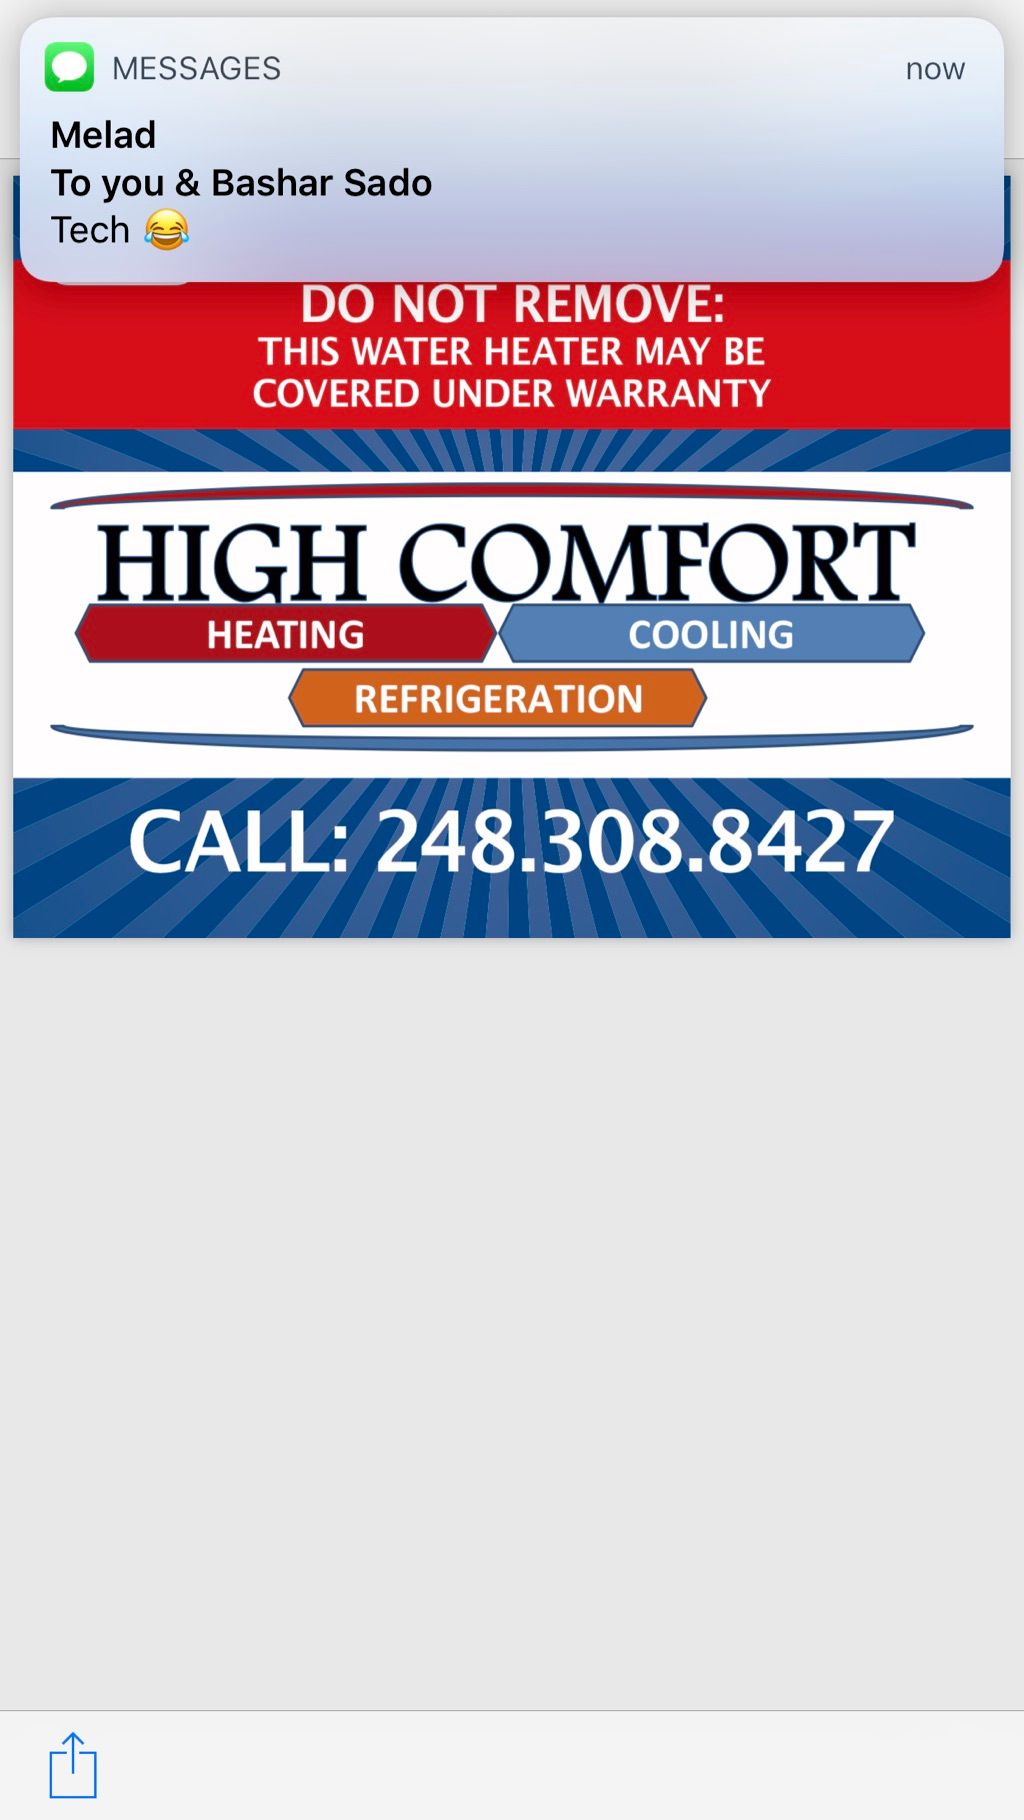 High comfort heating and cooling